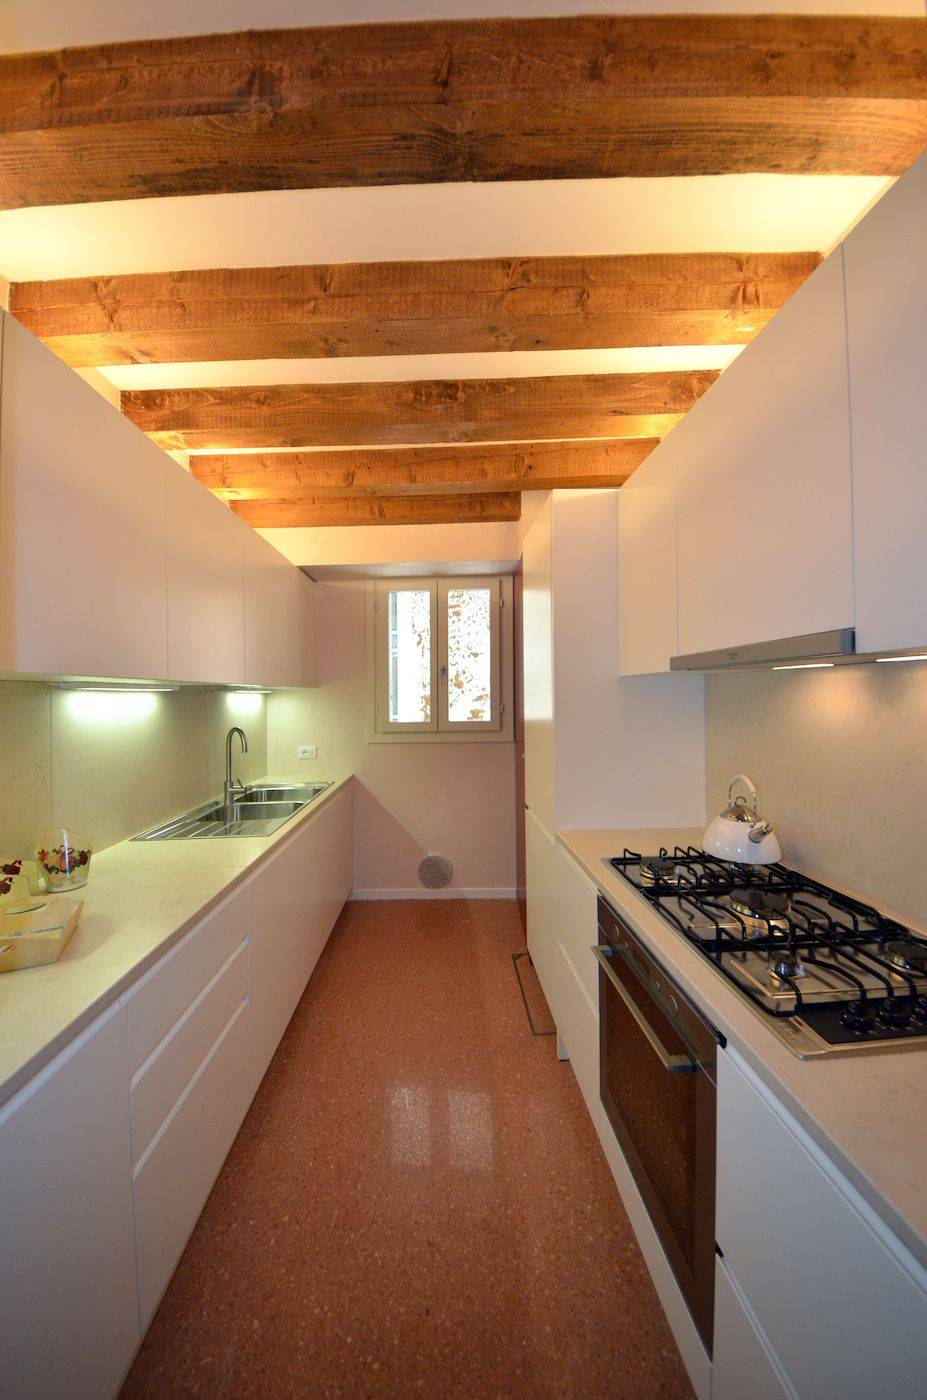 well equipped brand new kitchen of the Palladio apartment